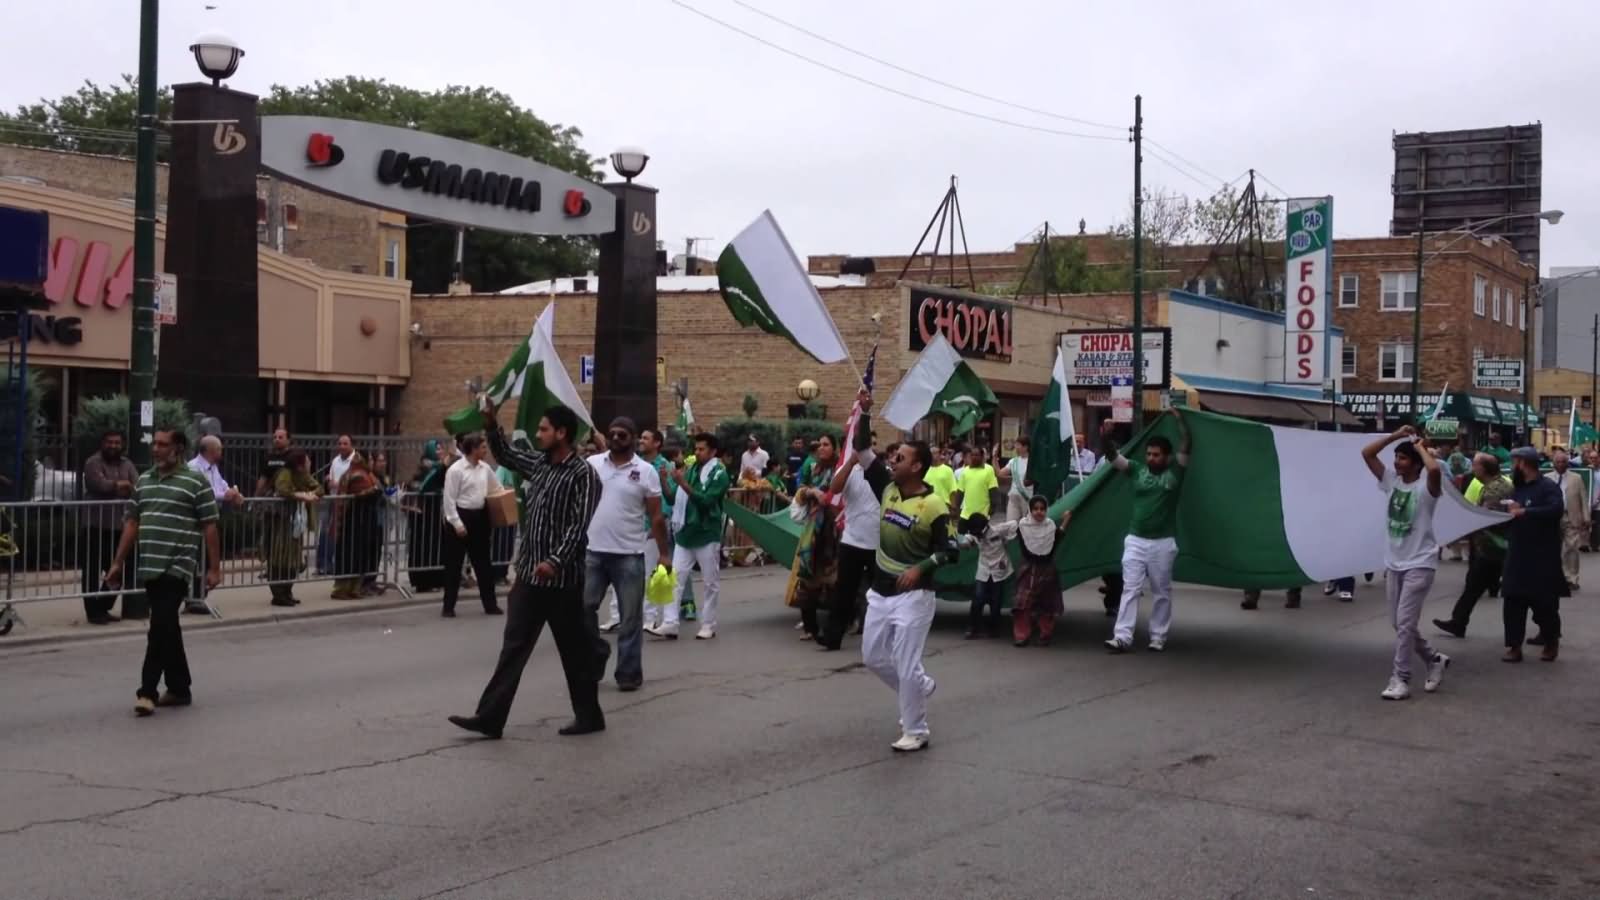 Pakistan Independence Day Parade At Chicago